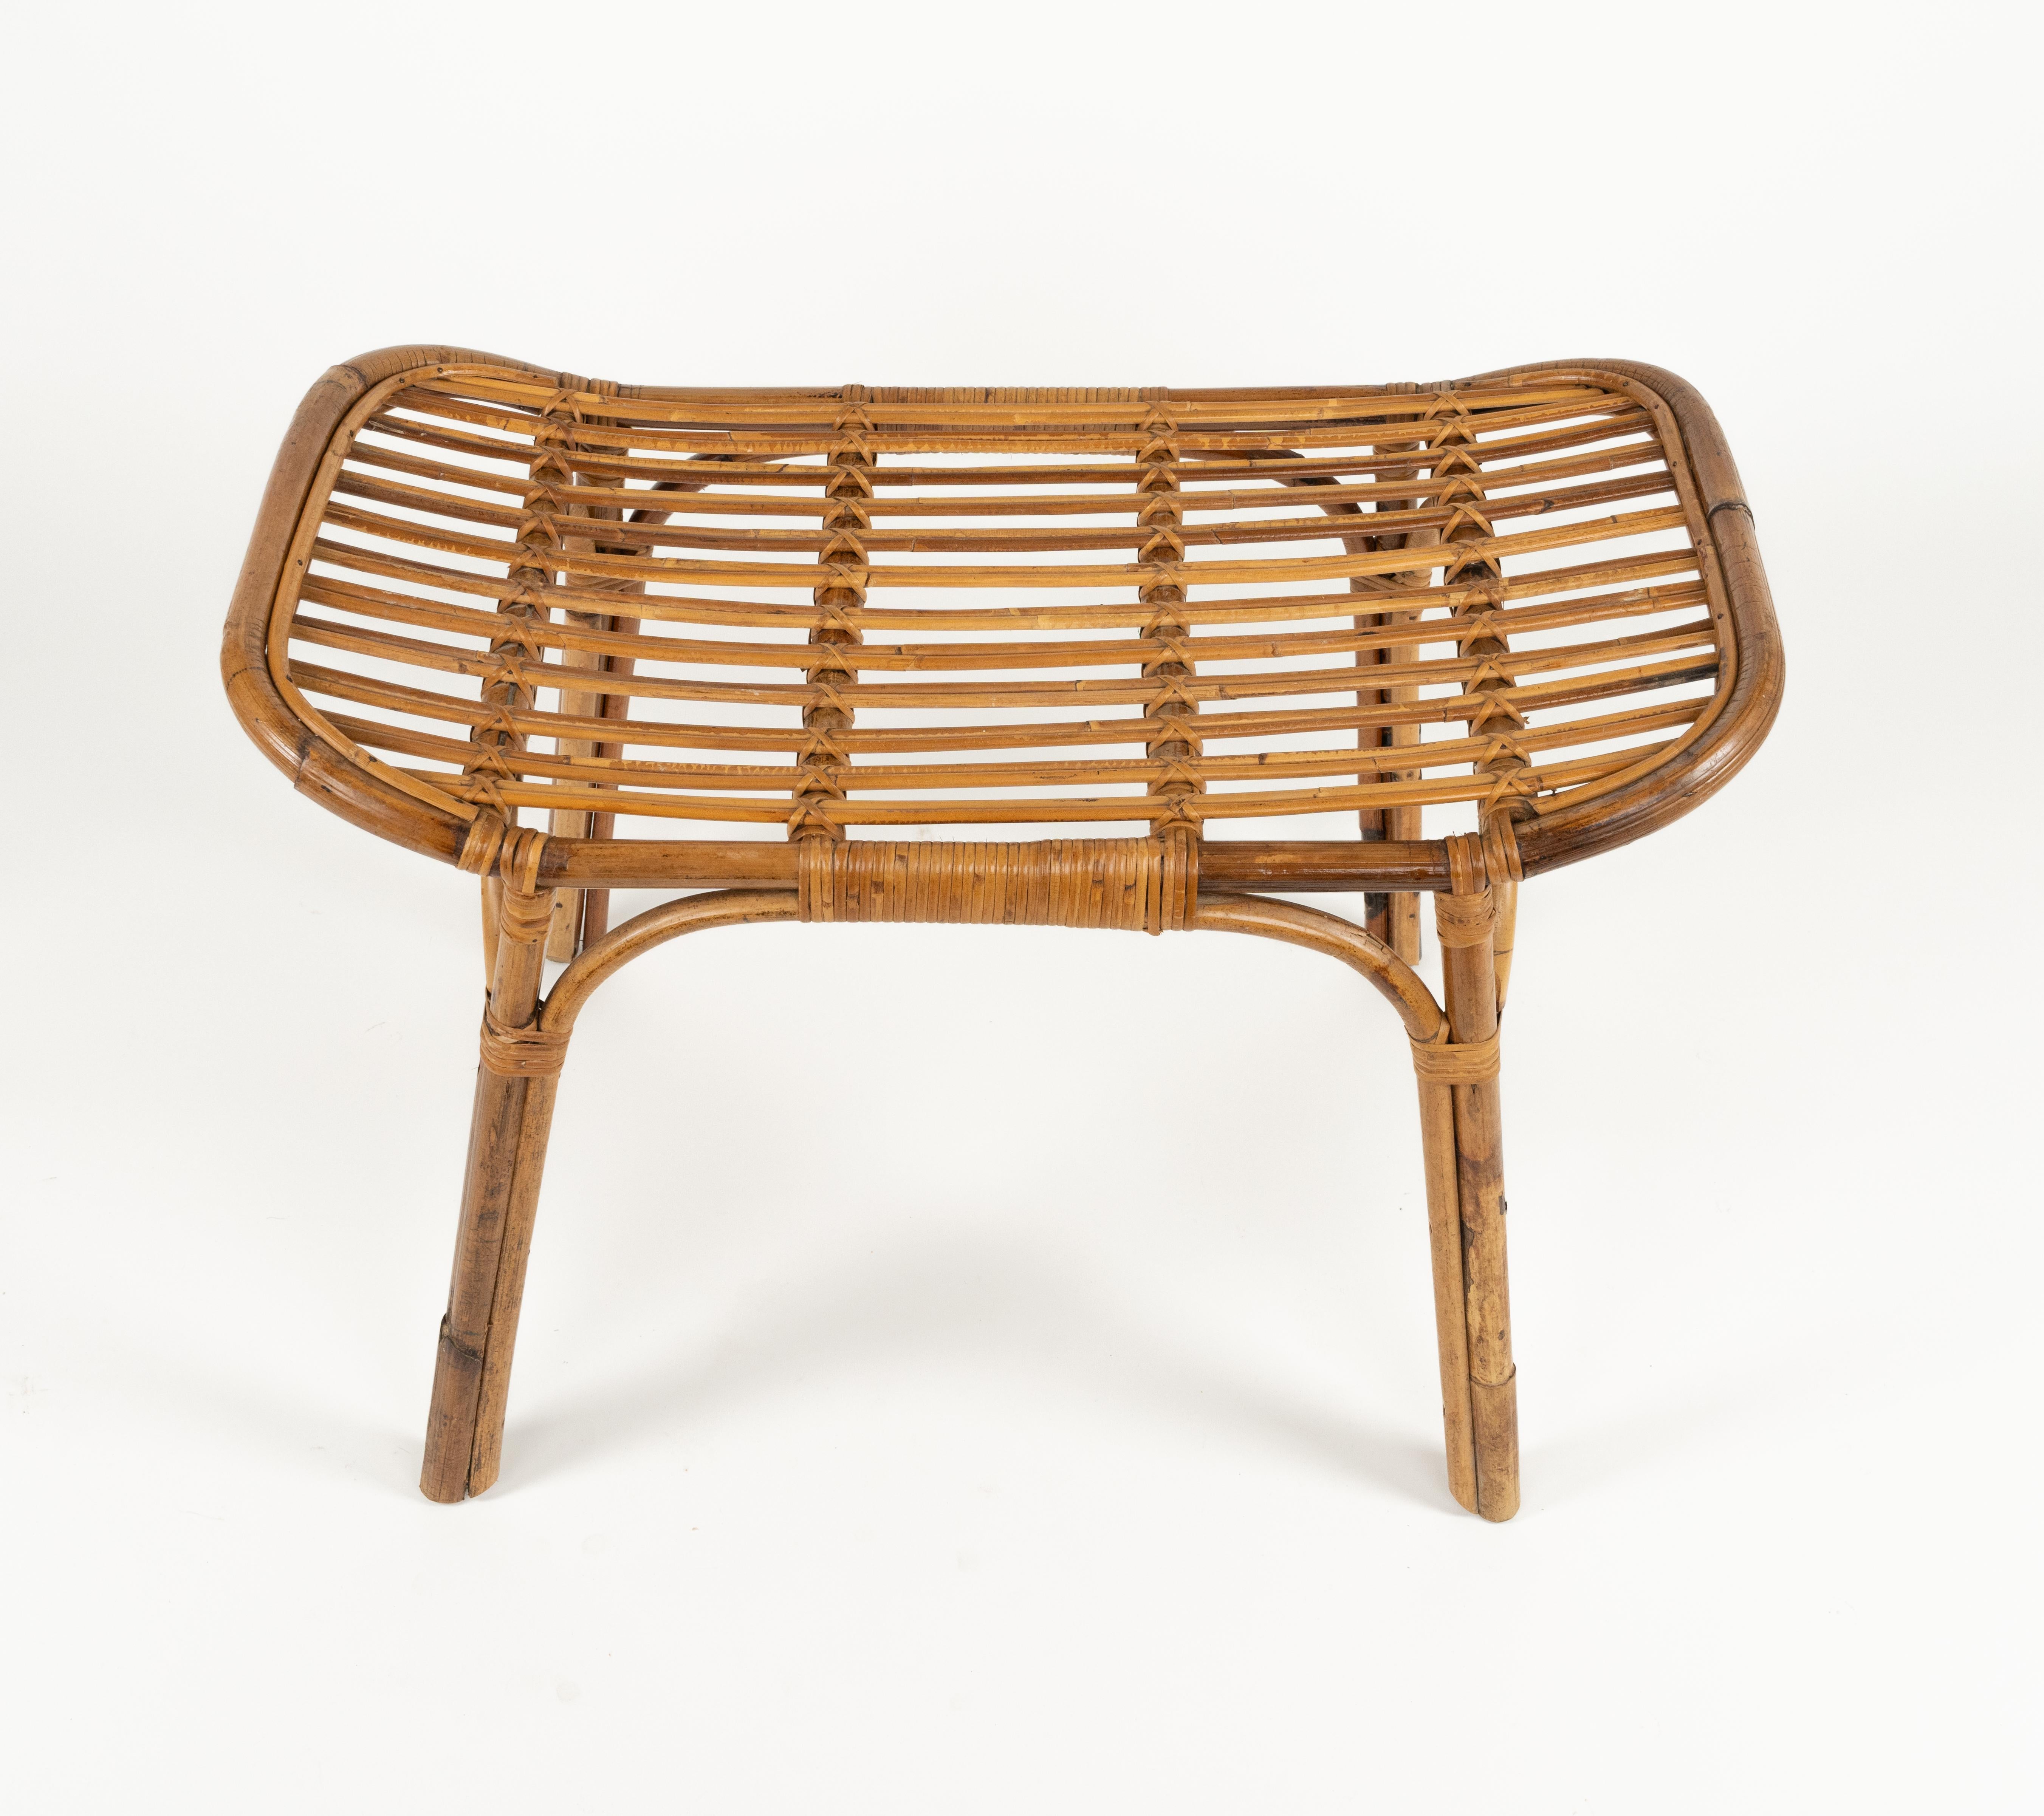 Midcentury Bench or Side Table in Rattan & Bamboo Tito Agnoli Style, Italy 1960s In Good Condition For Sale In Rome, IT